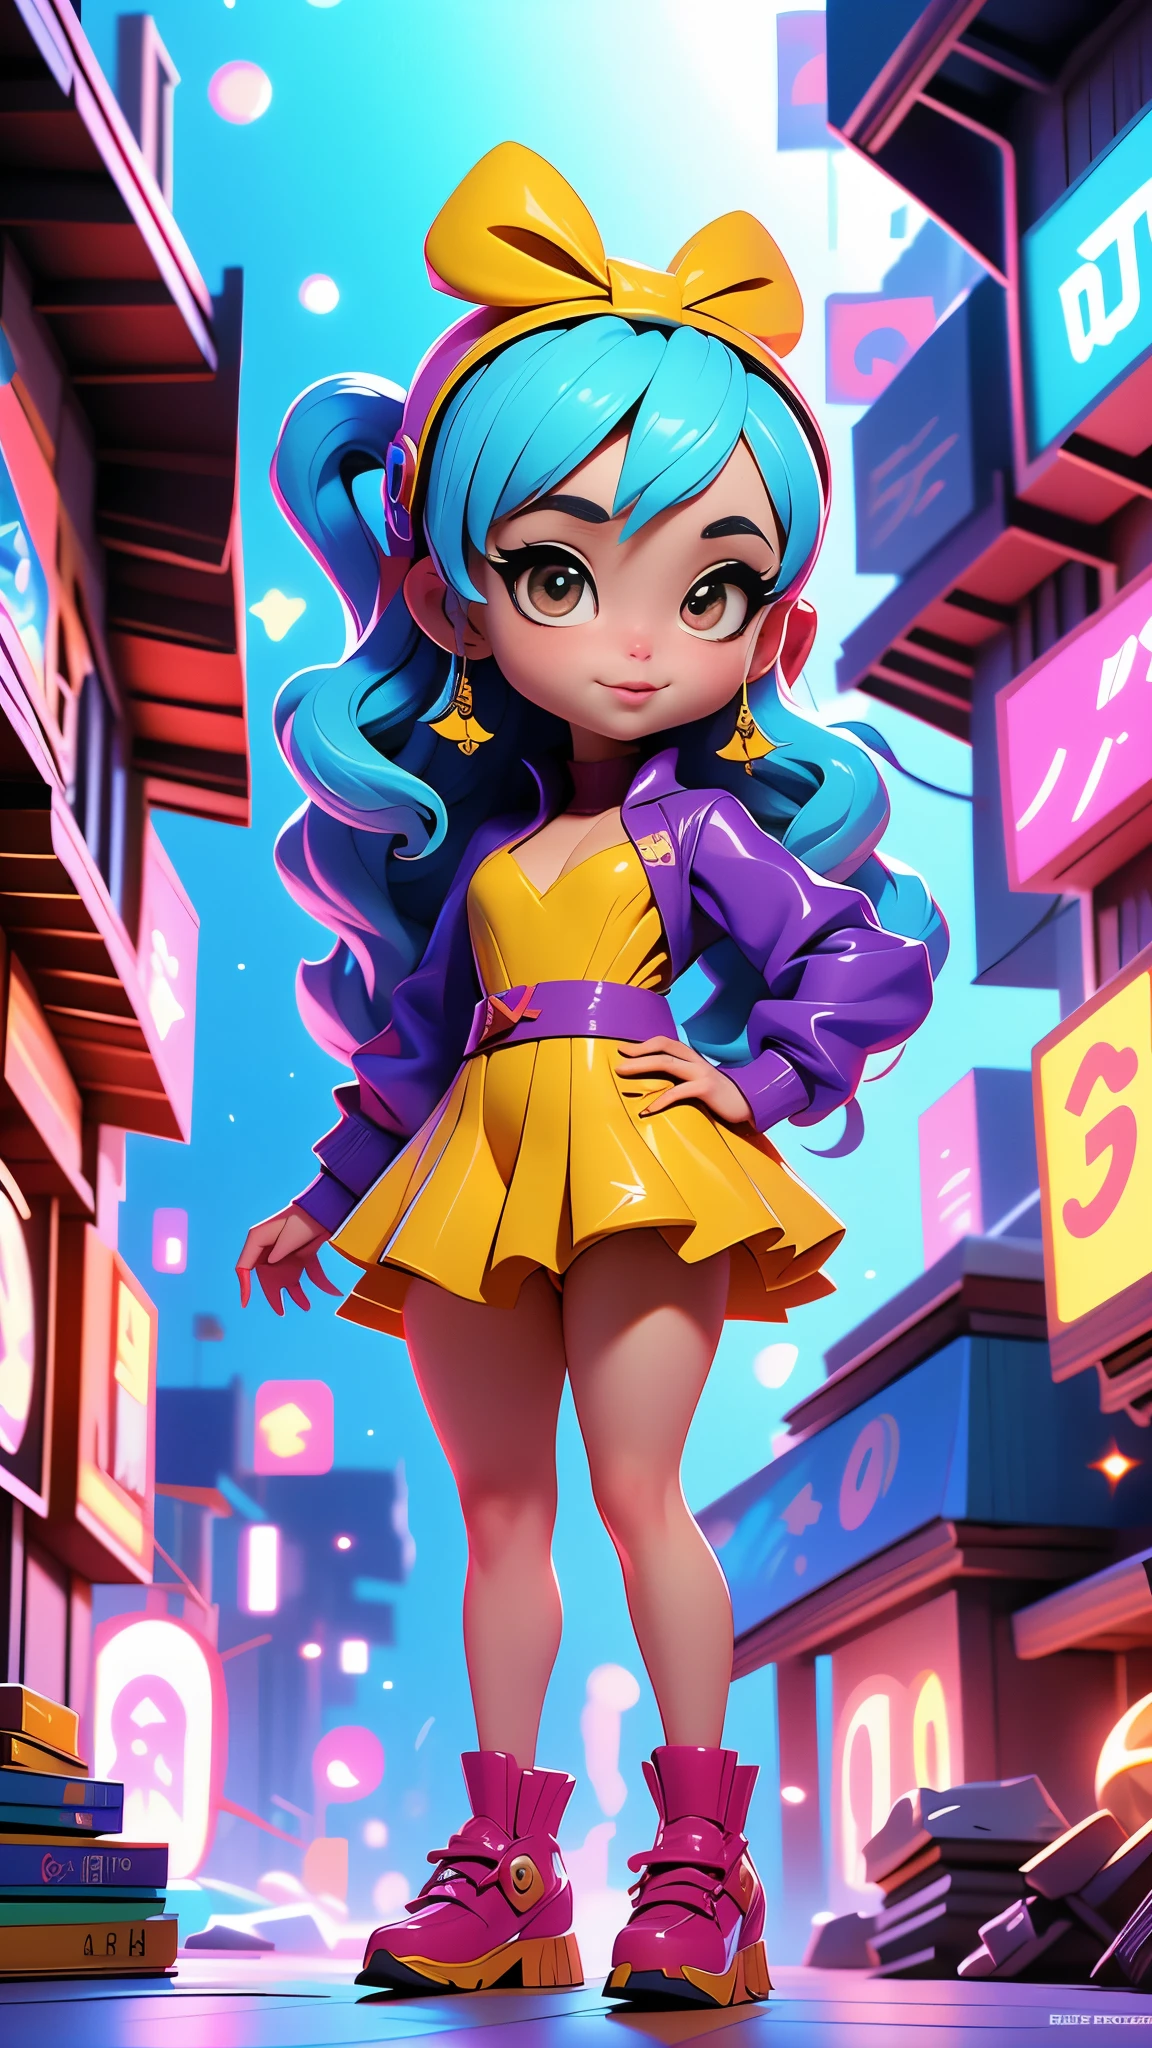 (The best quality,A high resolution,Ultra - detailed,actual),Ariana Grande standing on a street near a building, rossdraws vibrant cartoons, Lois van Baarle y Rossdraws, stylized anime, artgerm and Lois van Baarle, cyberpunk anime digital art, artwork in the style of guweiz, urban girl fanart, inspired by Jules Chéret, Artgerm Style